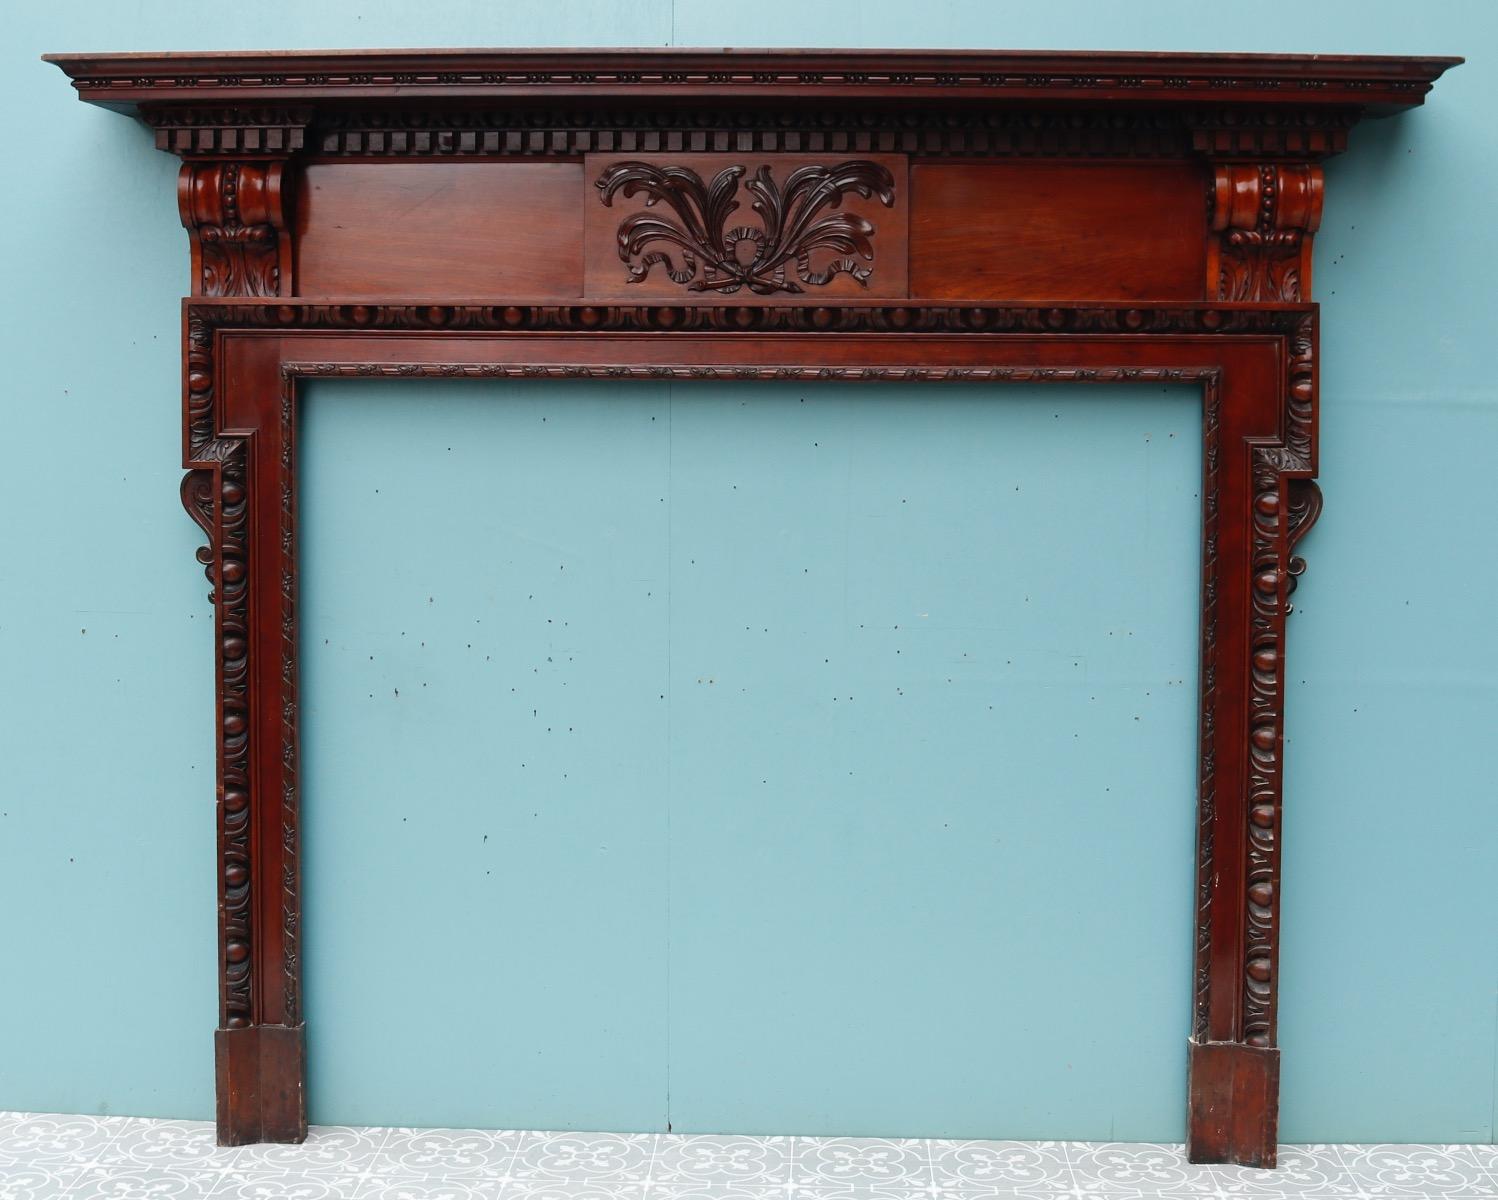 A carved mahogany fire surround in the Neoclassical style.
Additional dimensions
Opening height 112.5 cm
Opening width 130 cm
Width between outsides of the foot blocks 154.5 cm.